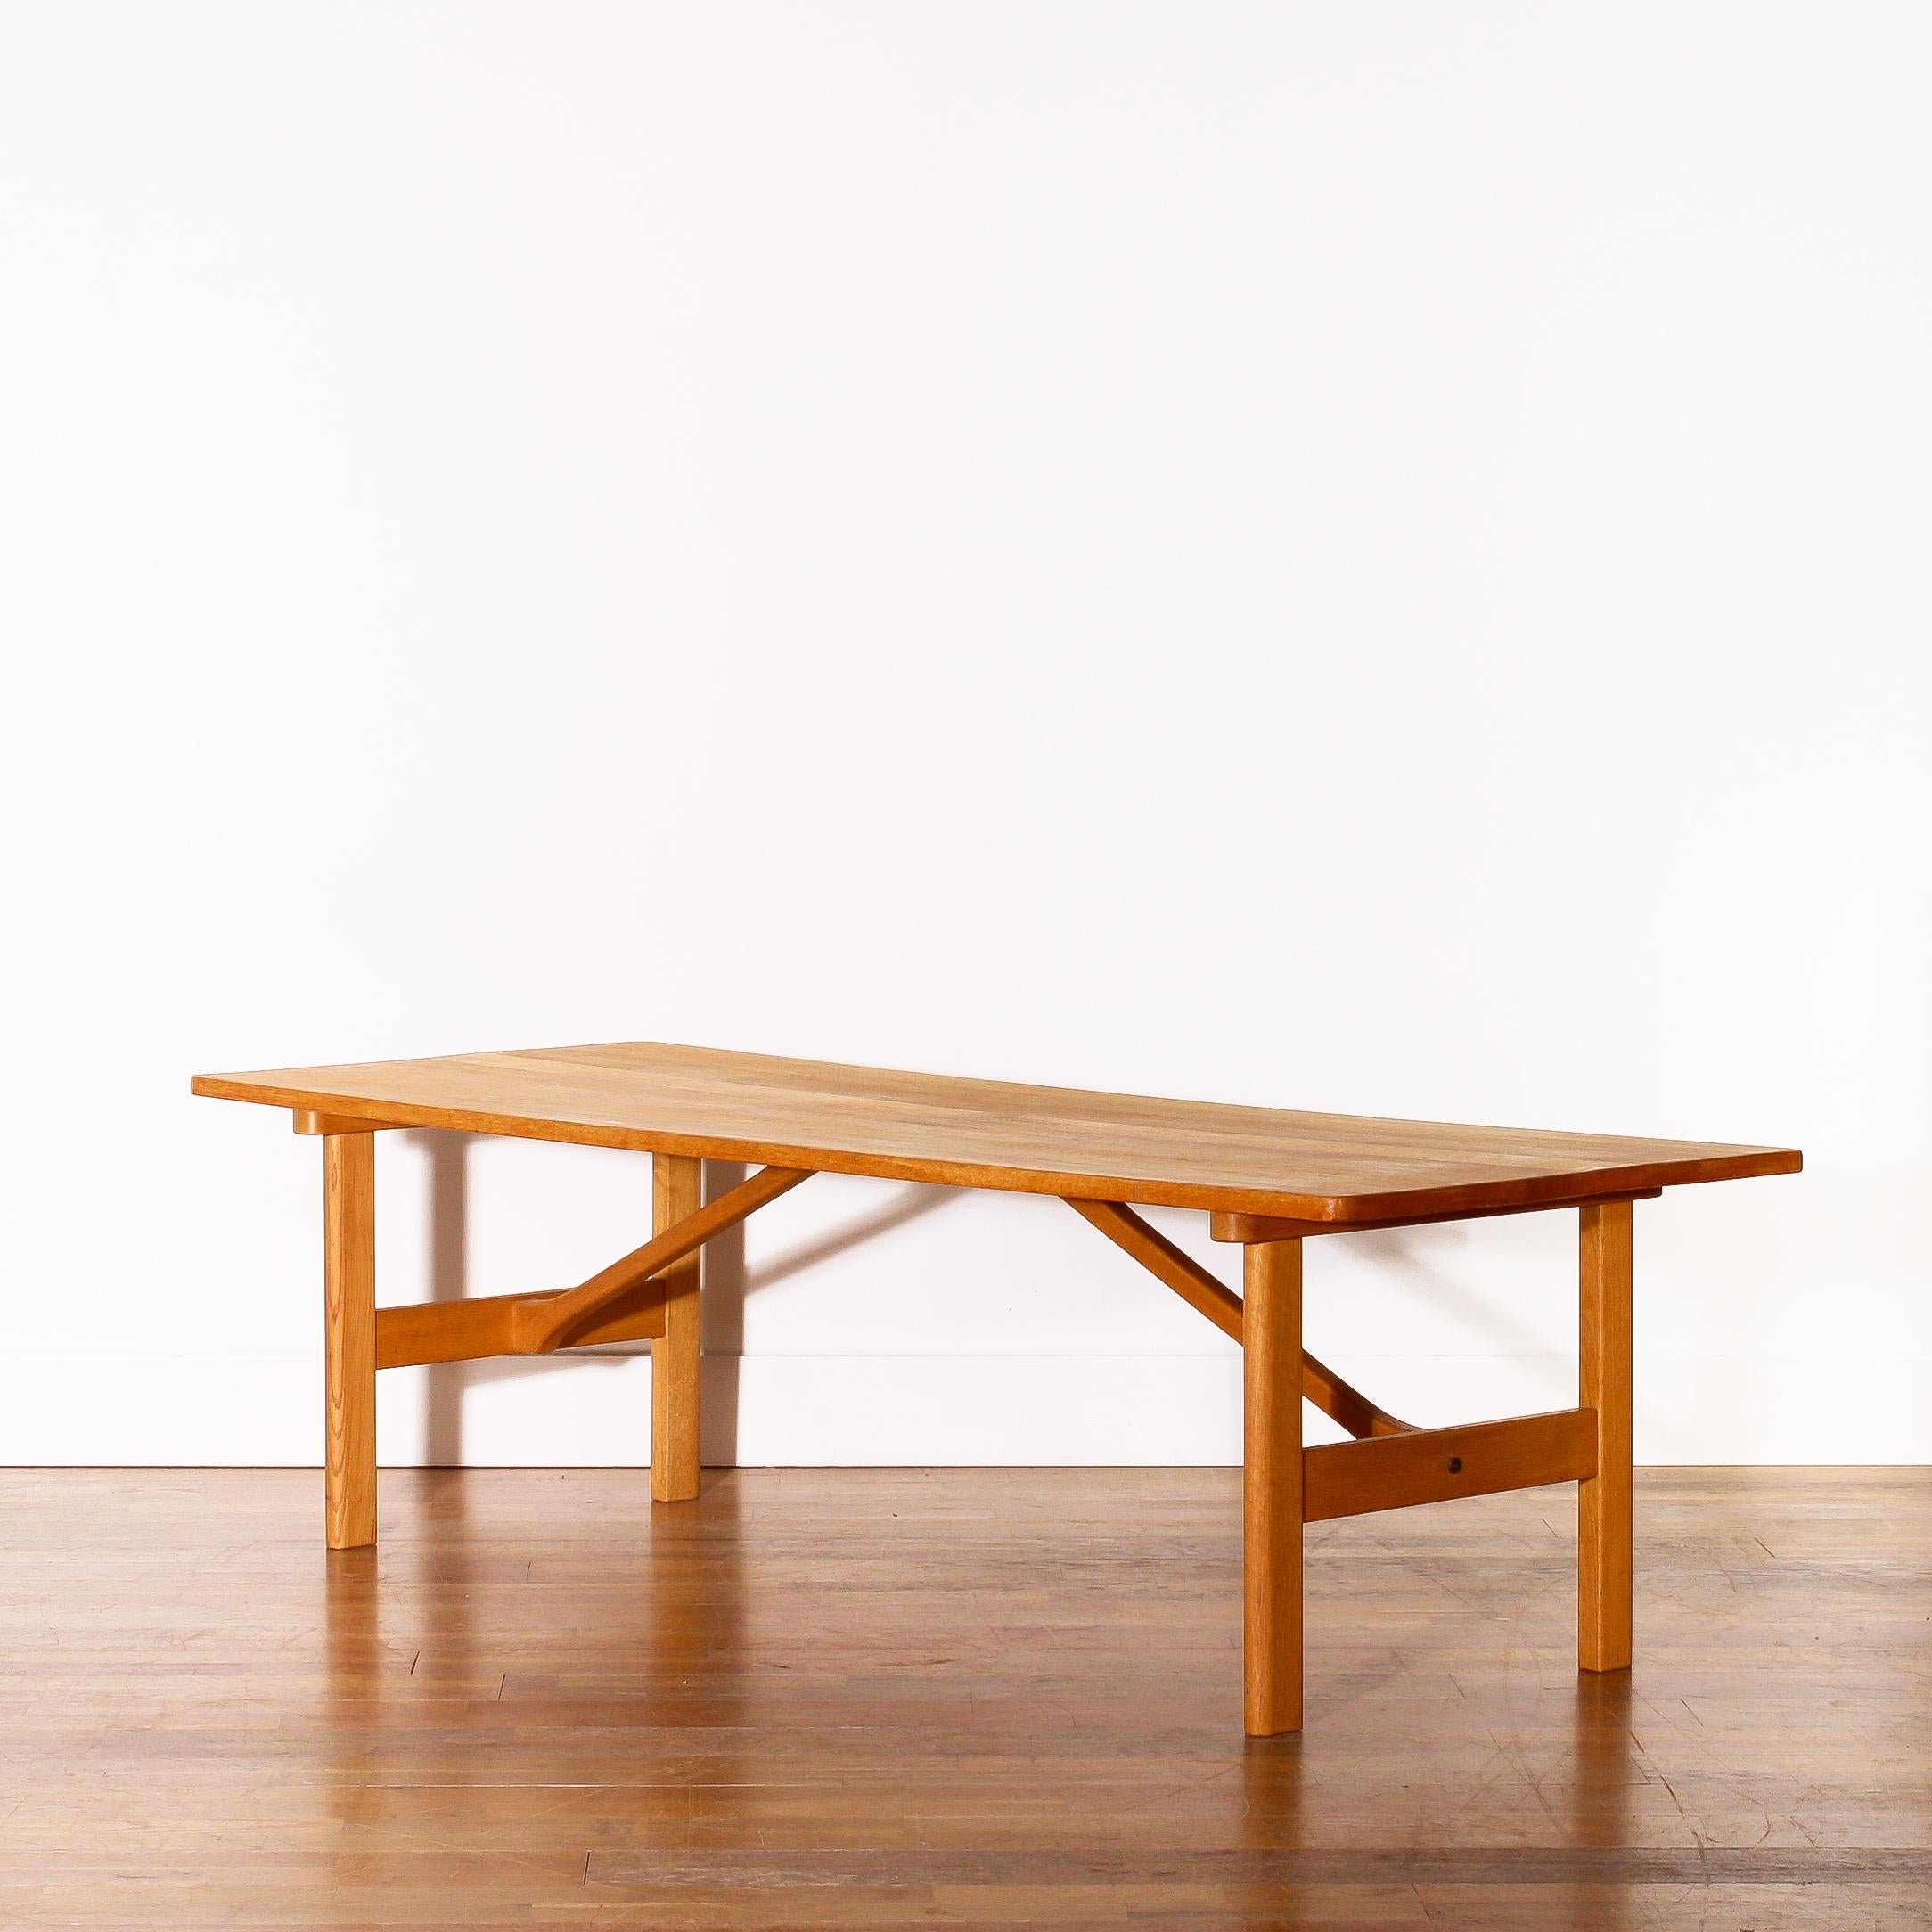 Beautiful large oak coffee table.
This table is designed by Børge Mogensen for Fredericia.
Period 1950s.
The dimensions are H 53 cm, W 180 cm, D 69 cm.